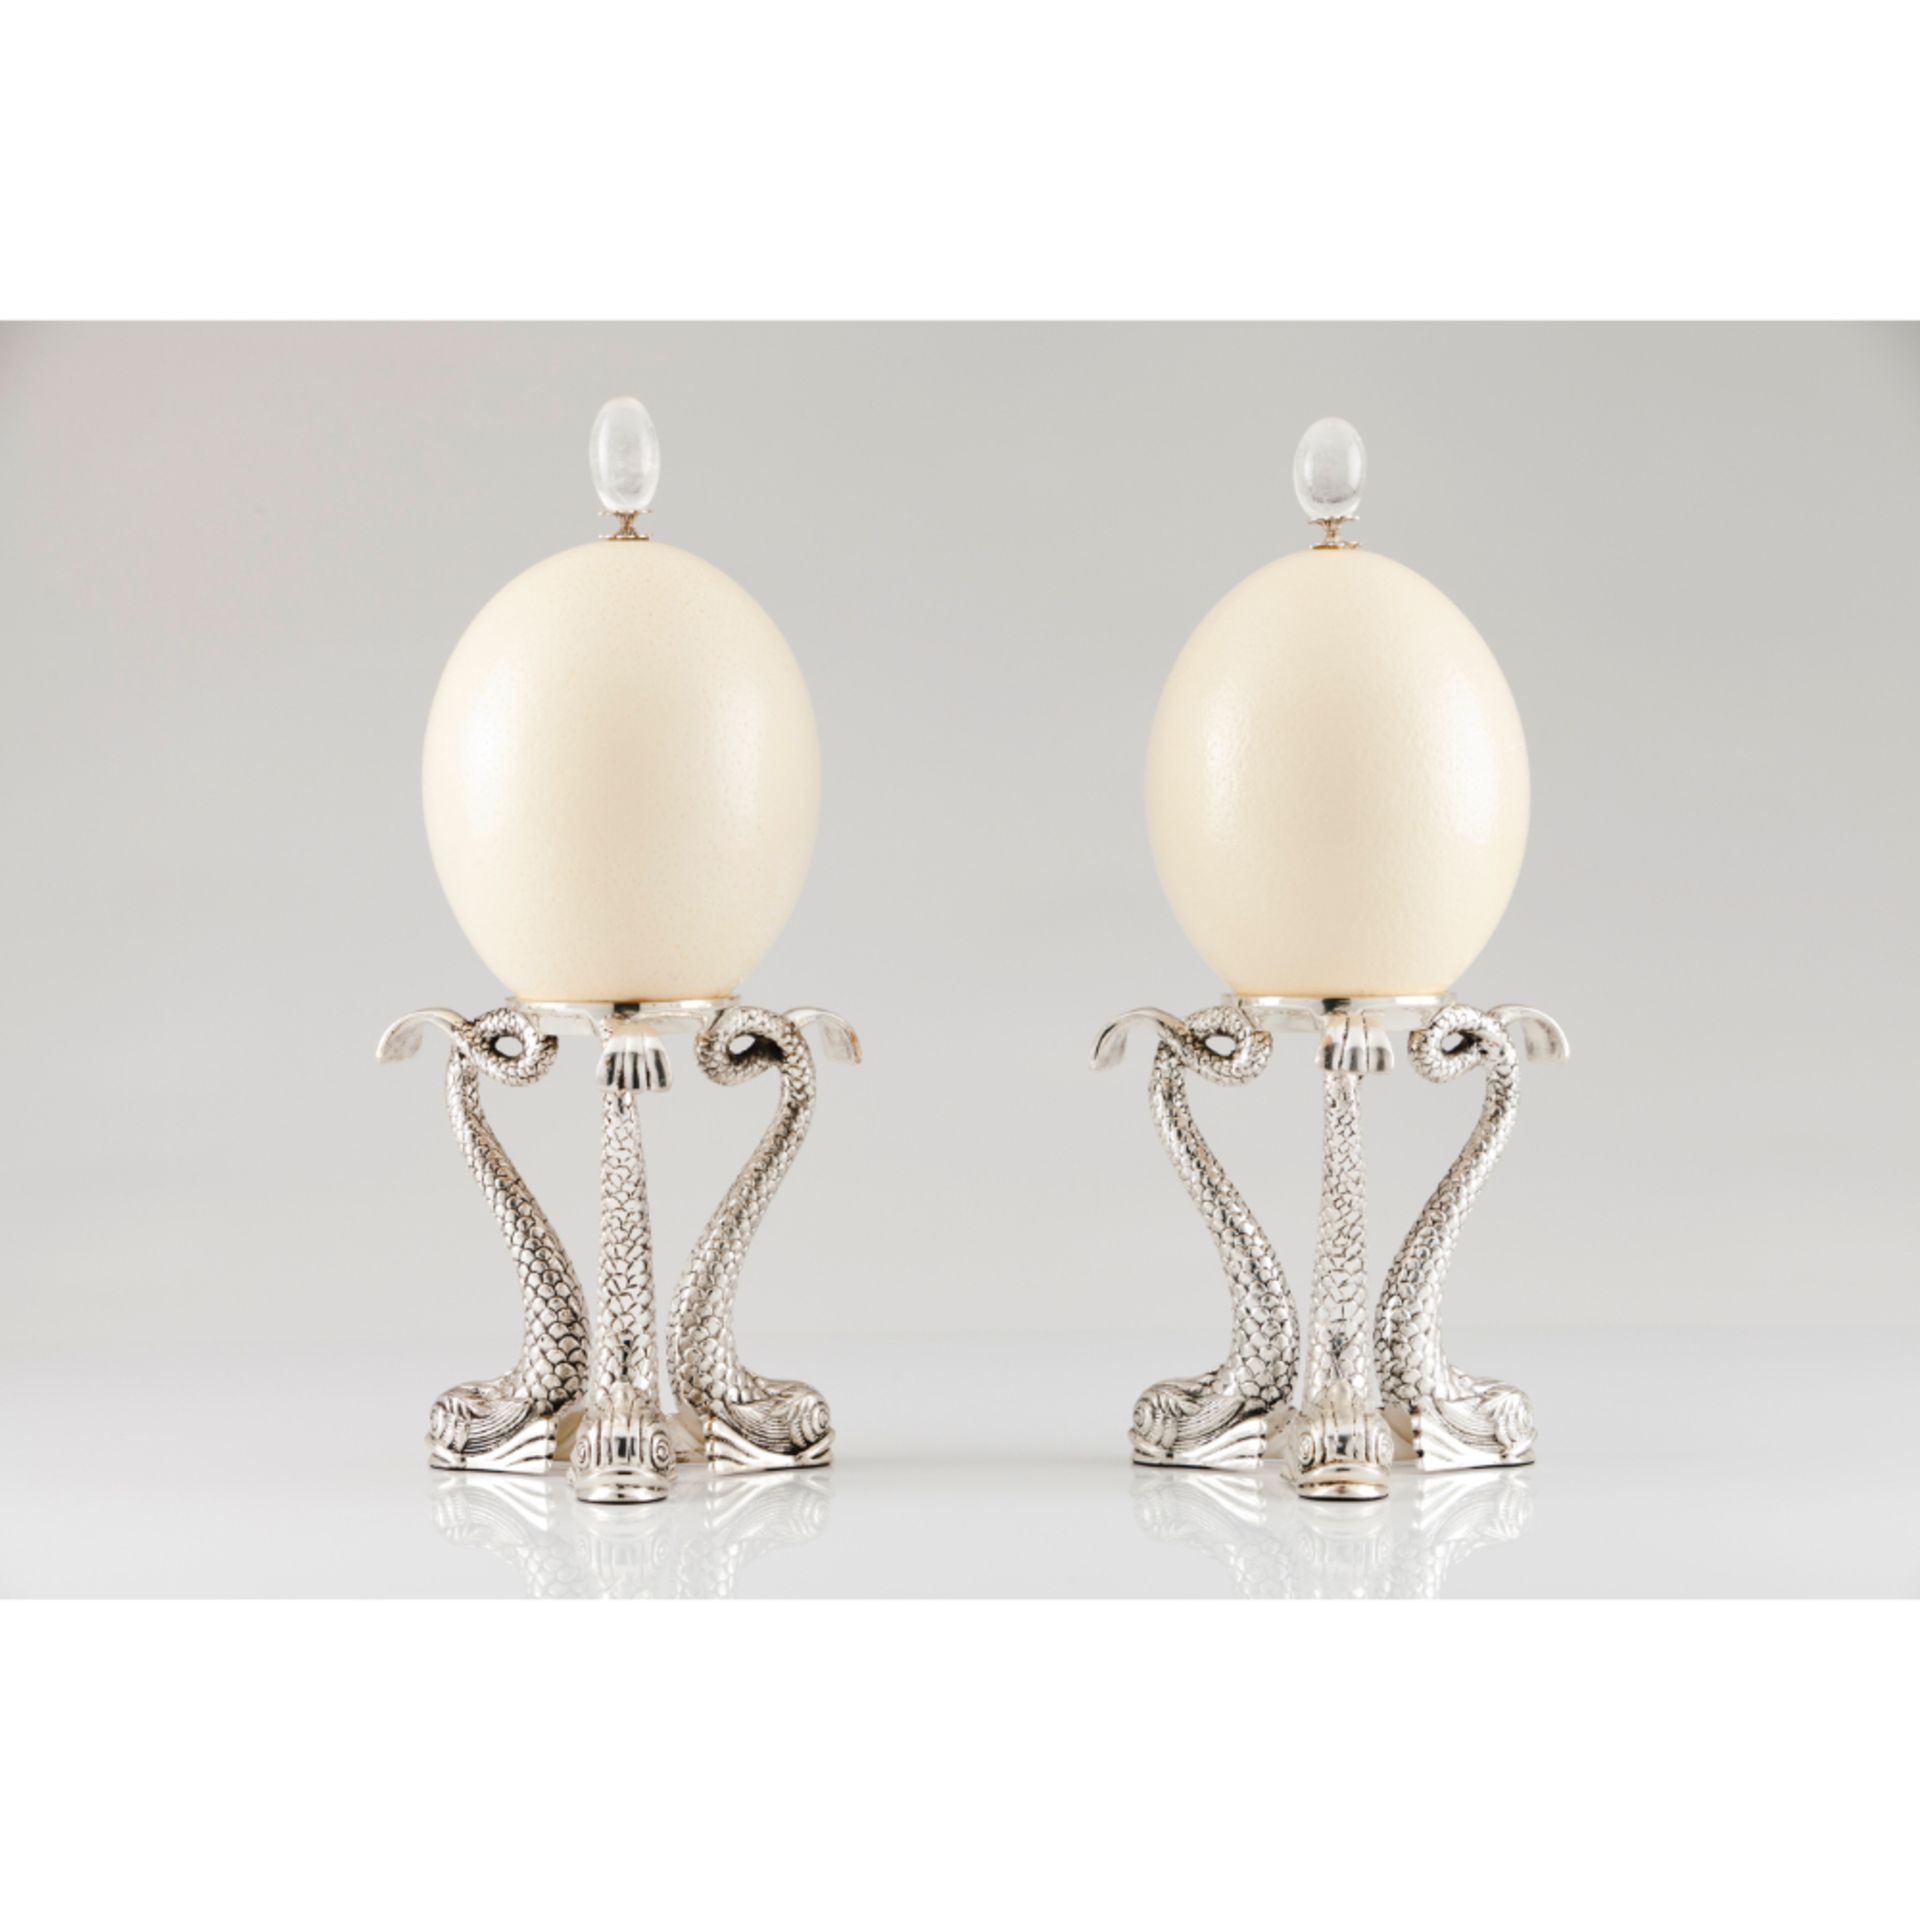 Two mounted ostrich eggs